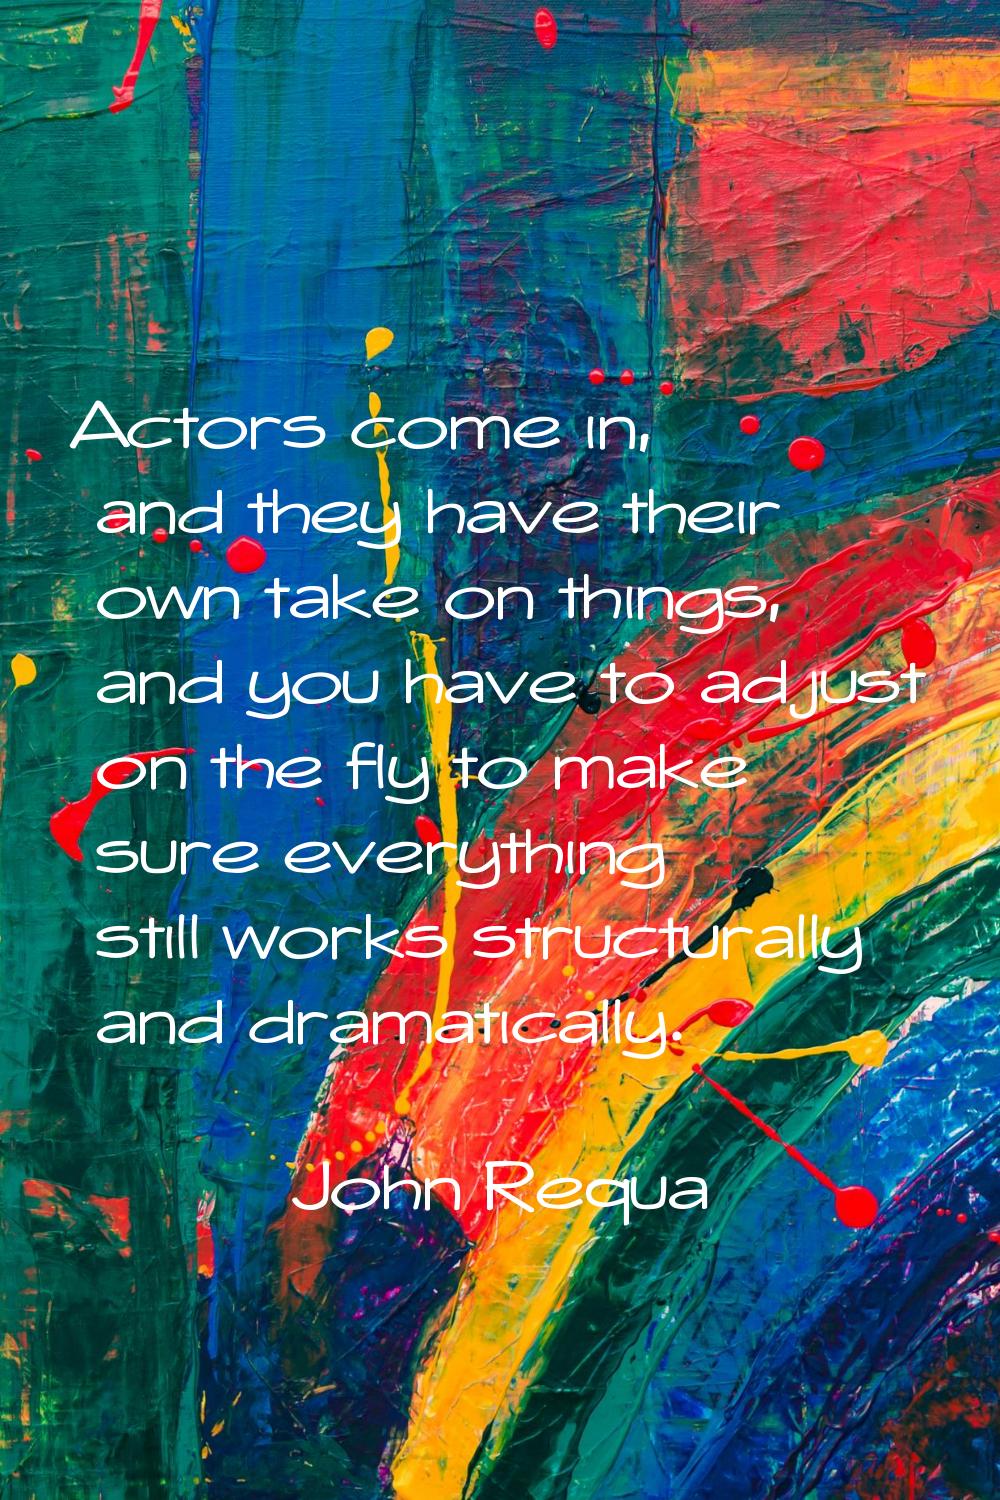 Actors come in, and they have their own take on things, and you have to adjust on the fly to make s